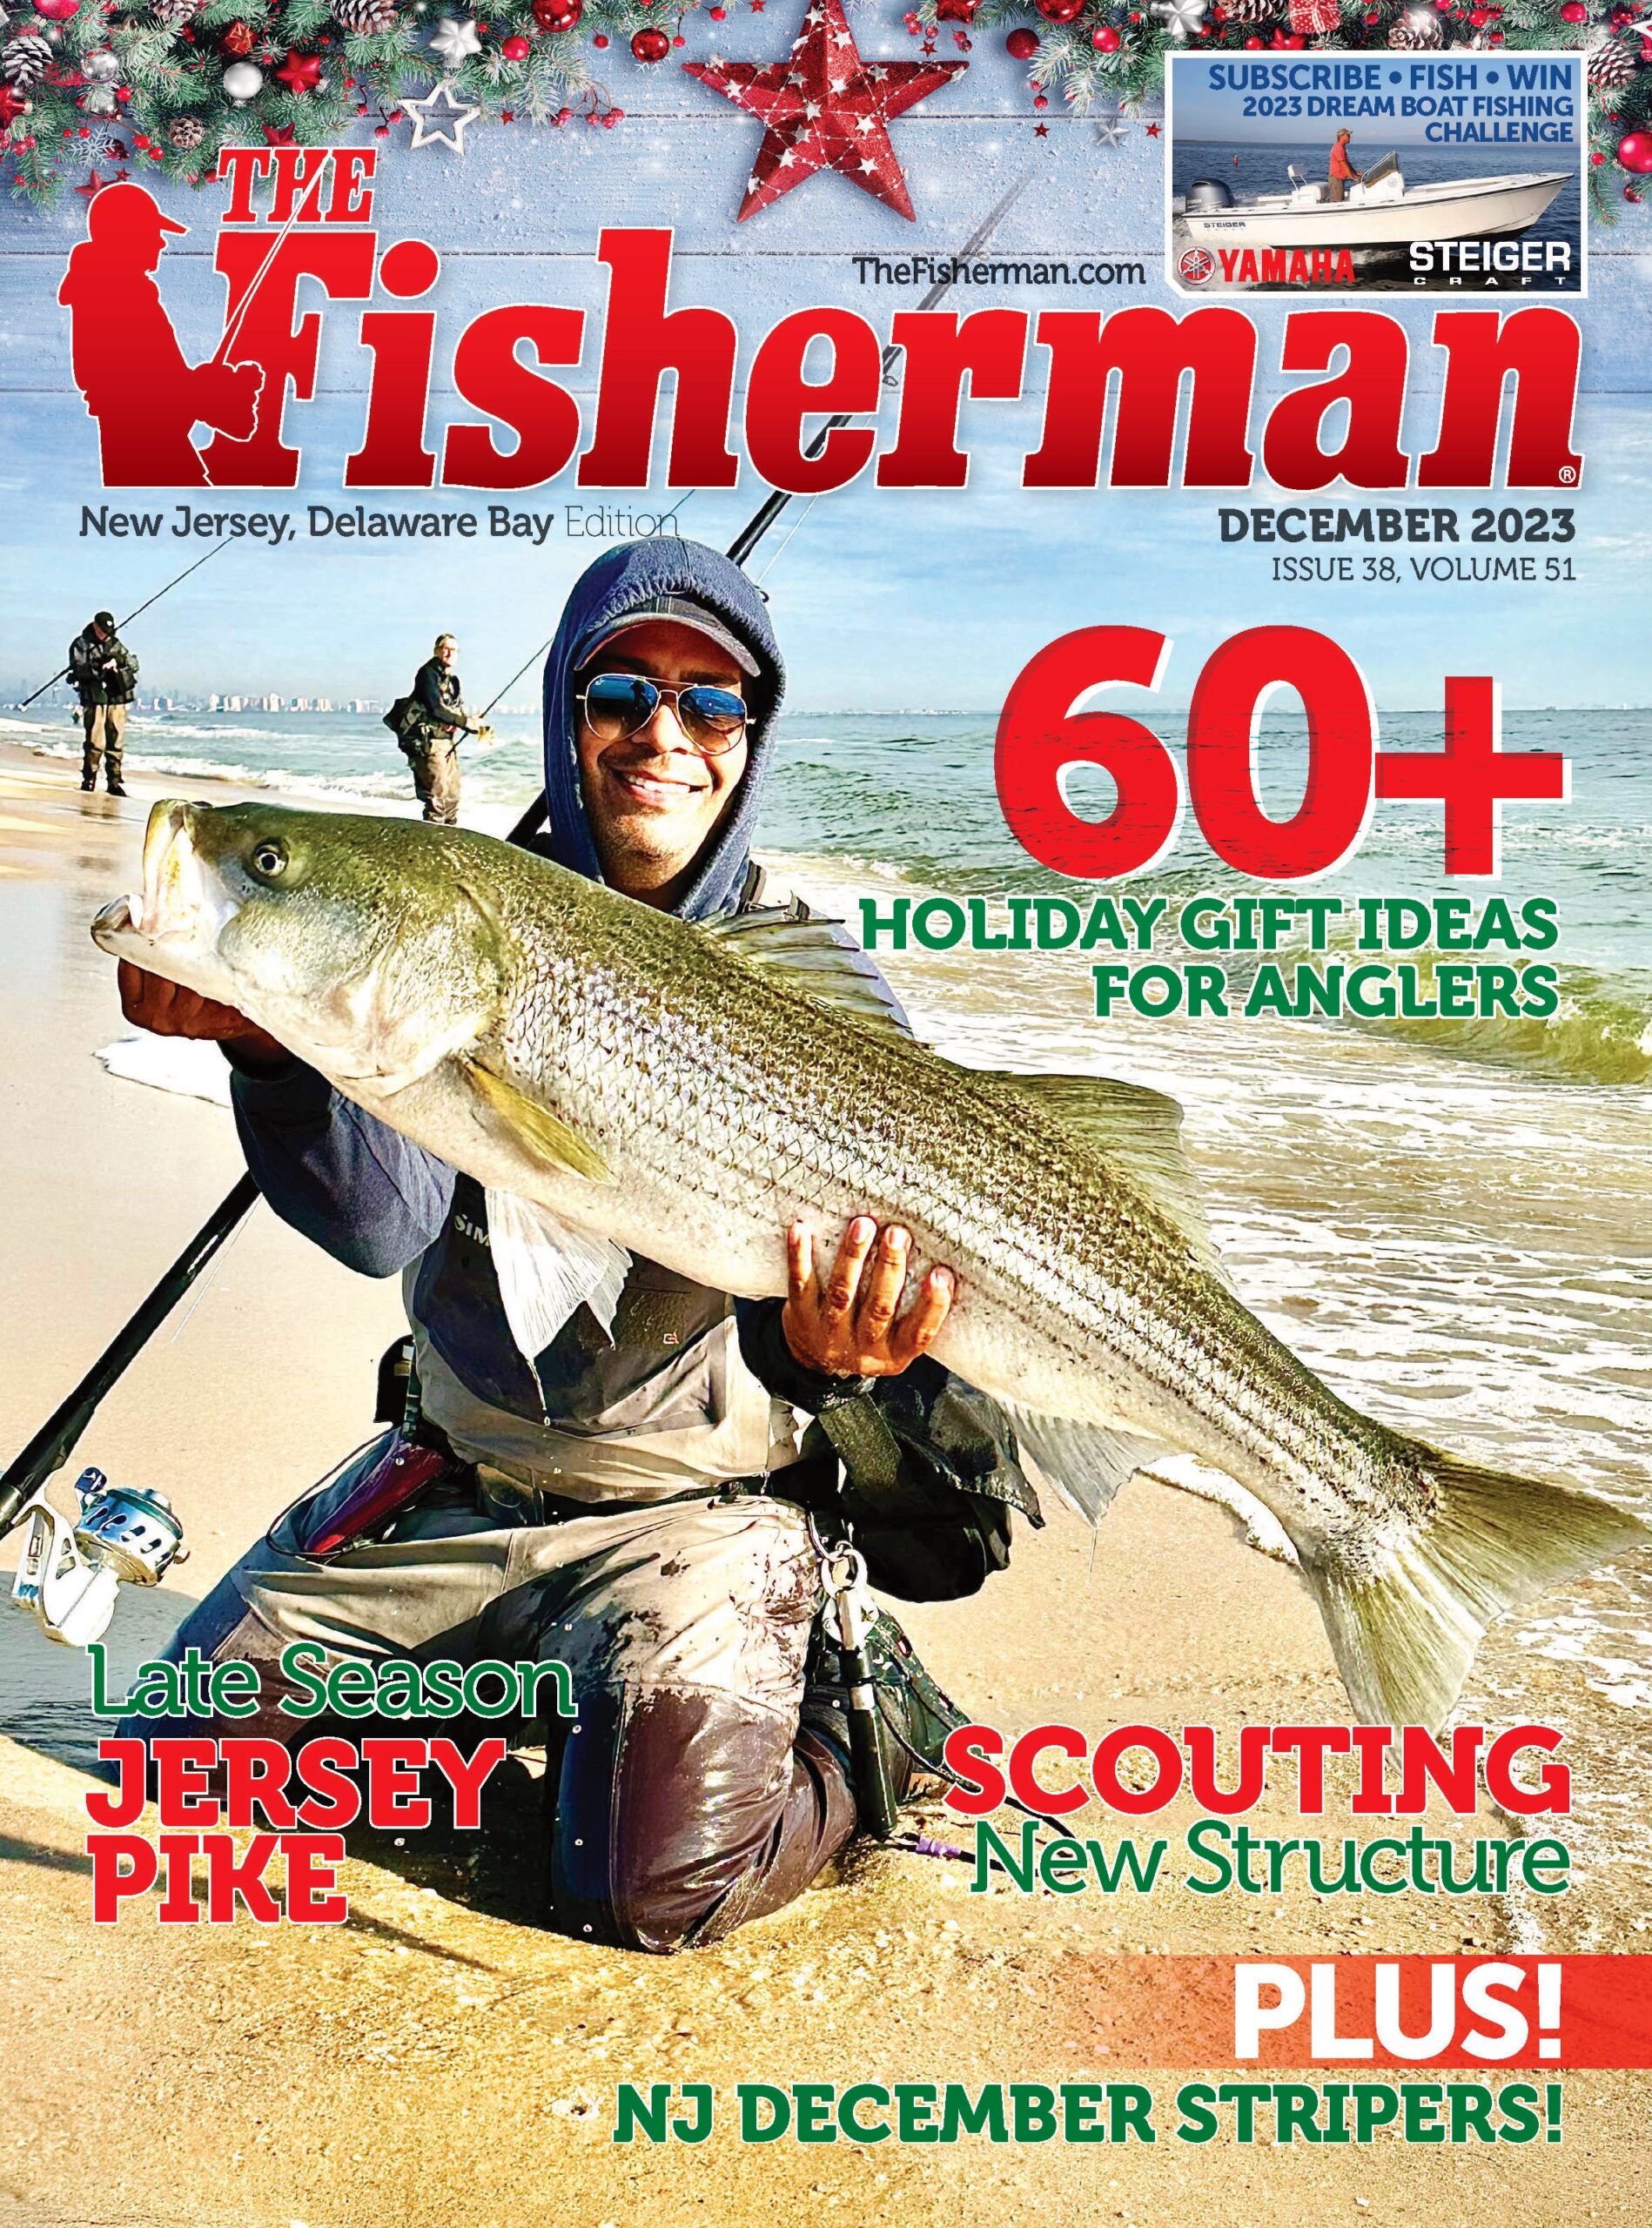 Get Access To 26 Weekly Editions Of The Fisherman - The Fisherman